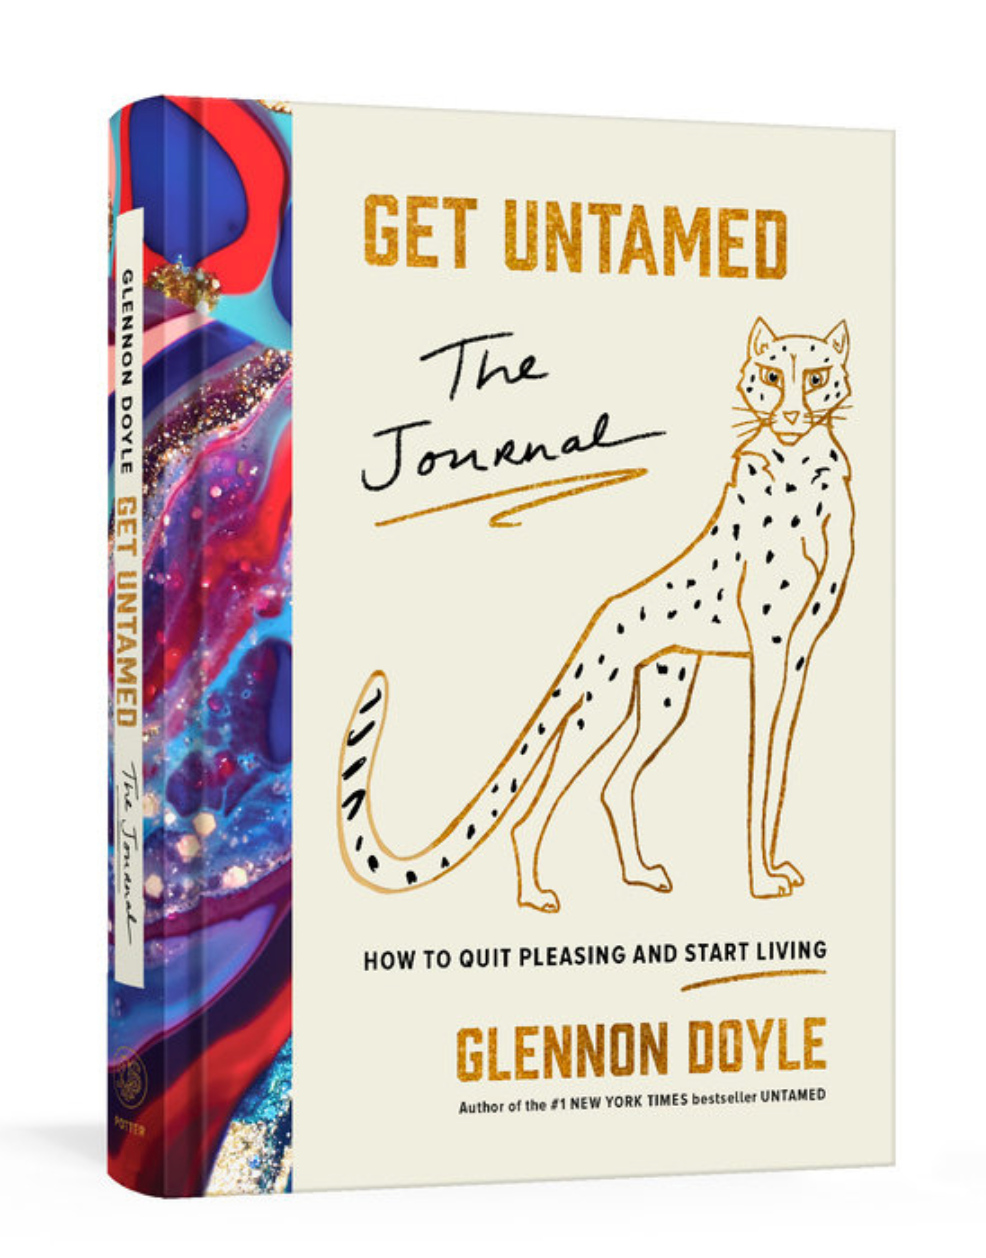 Get Untamed The Journal by Glennon Doyle